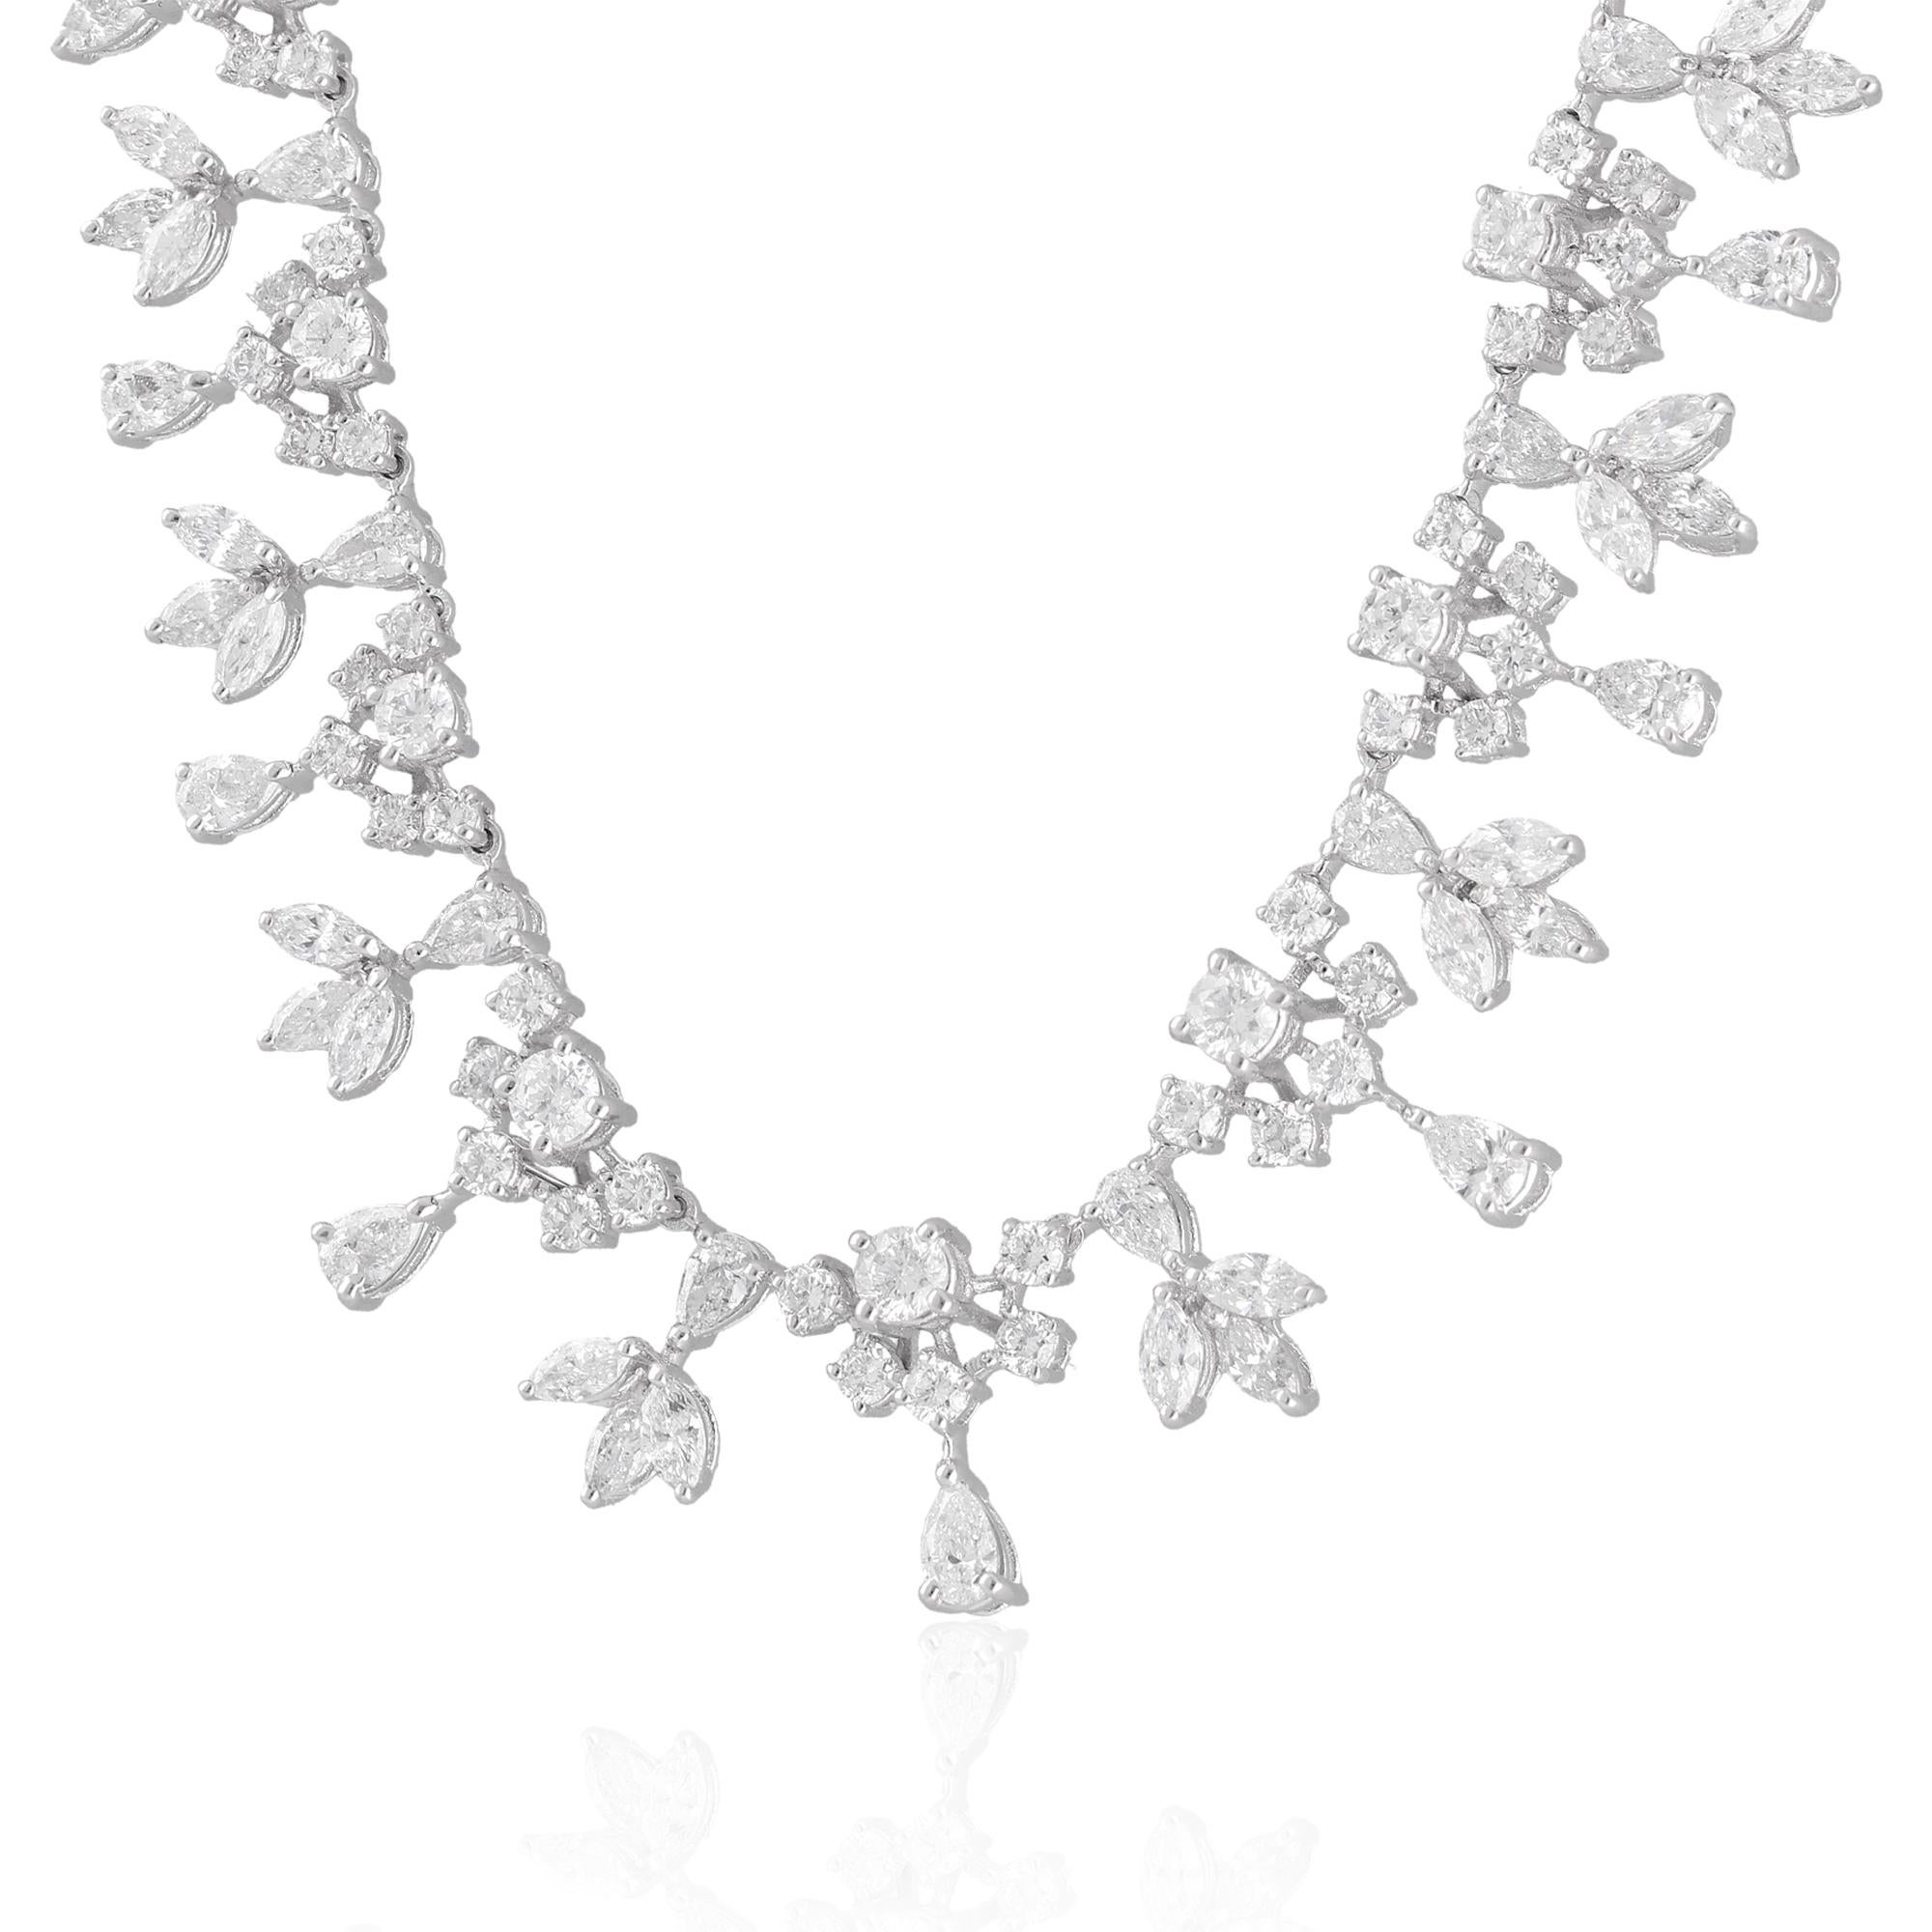 It sounds like we're describing a necklace made from 18 karat white gold, featuring a combination of round, pear-shaped, and marquise diamonds with a total weight of 8.20 carats. This necklace is categorized as fine jewelry due to the use of